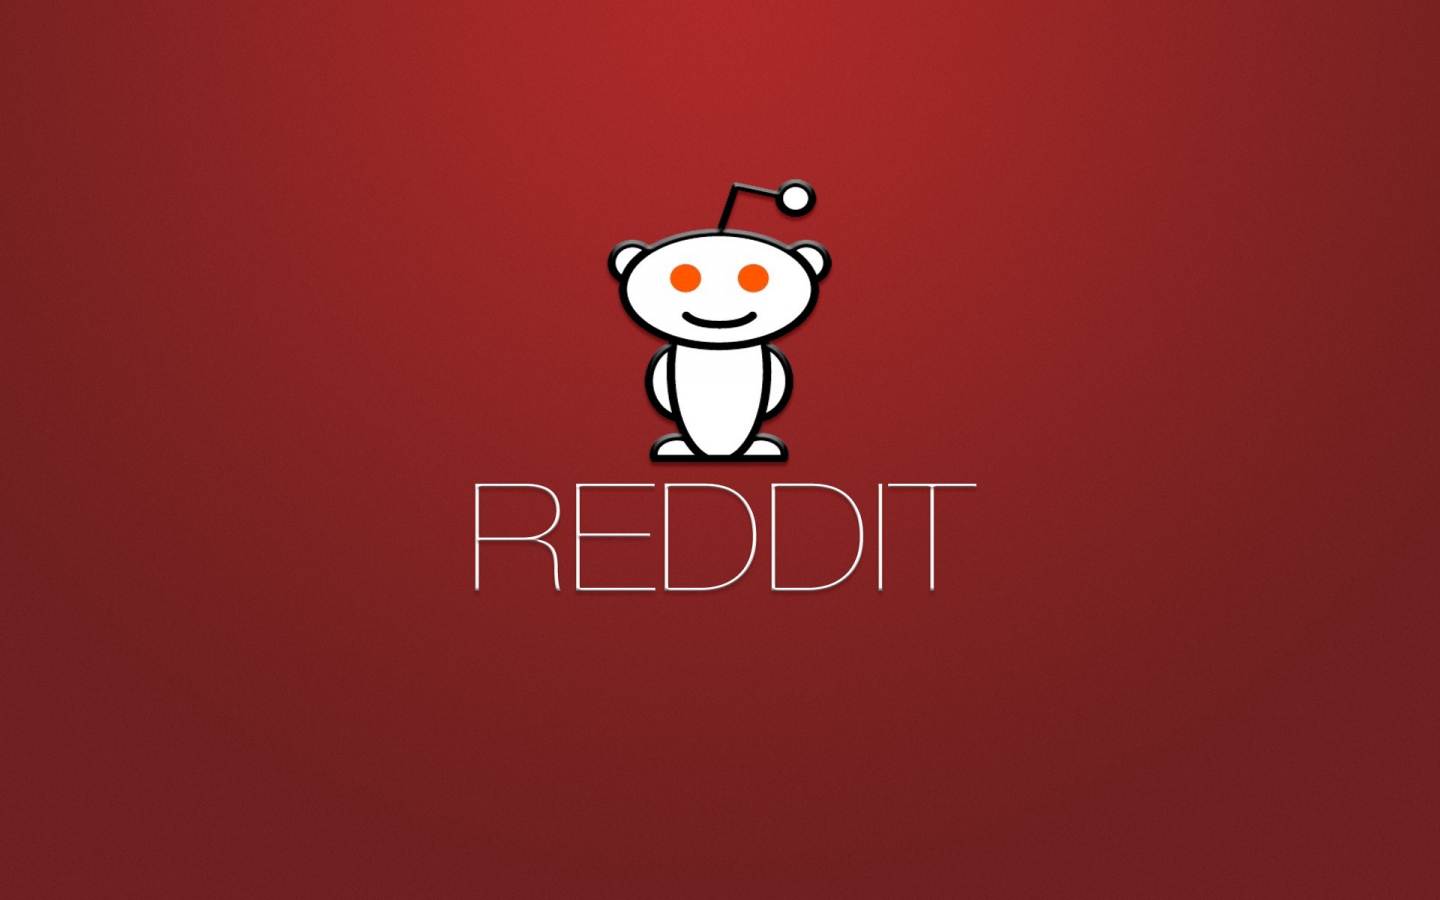 Reddit for 1440 x 900 widescreen resolution